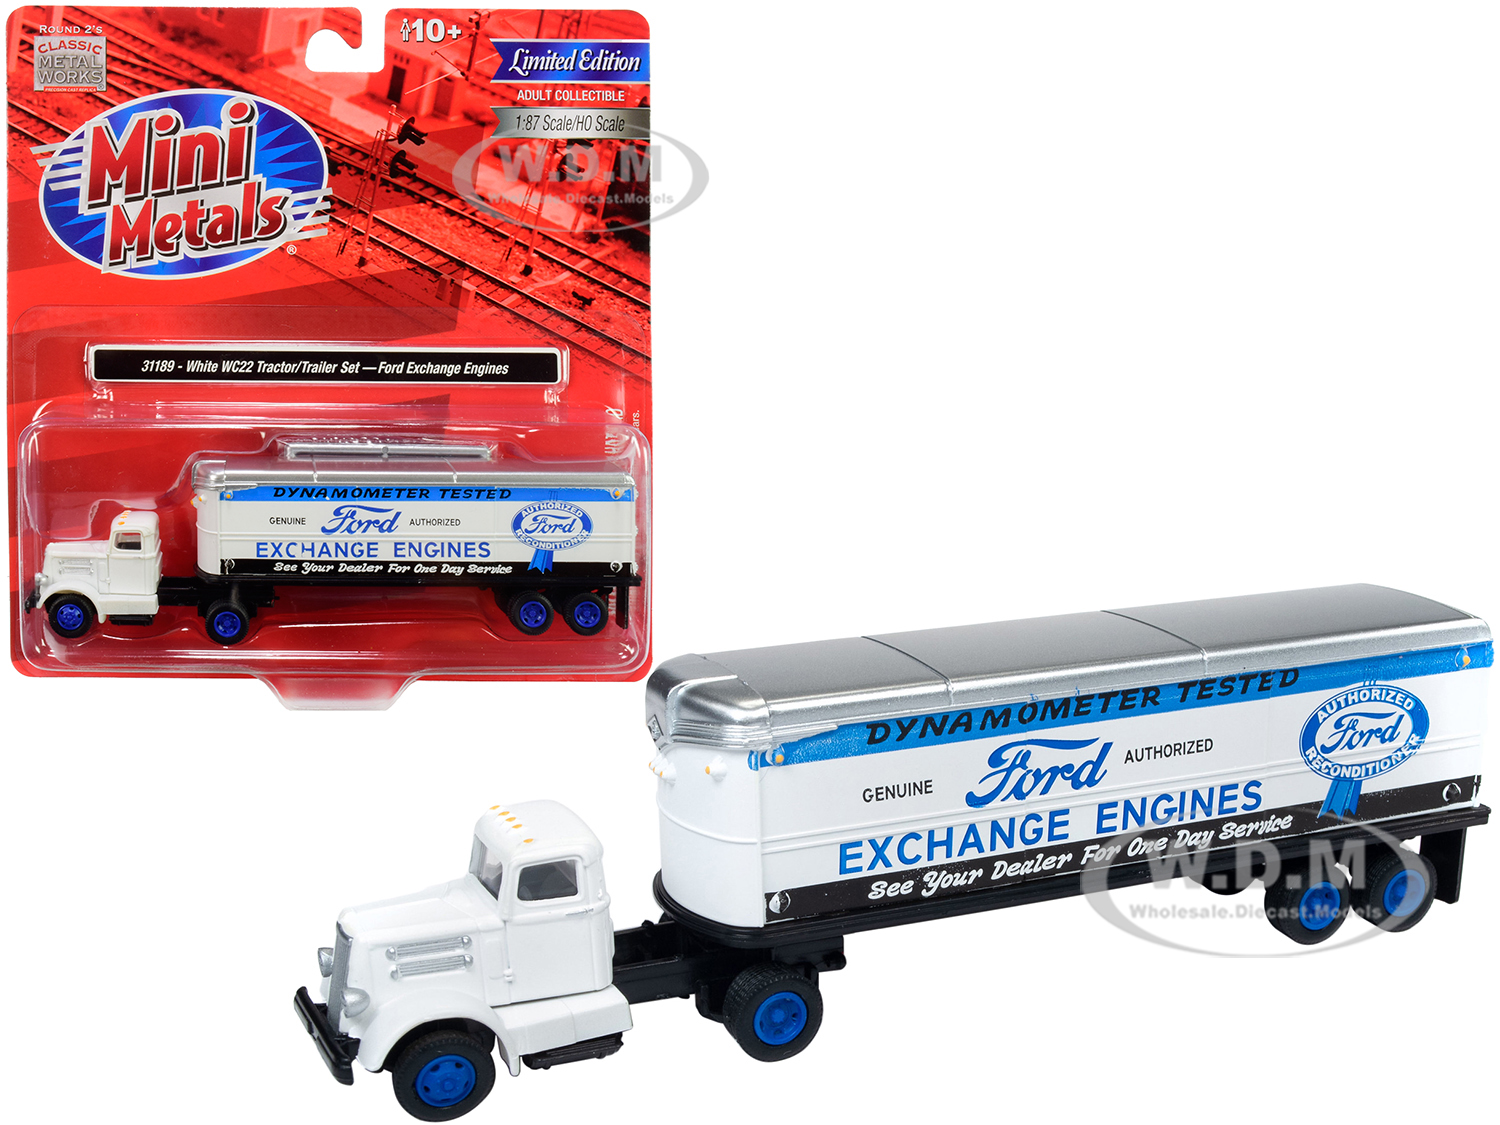 White Wc22 Tractor Trailer "ford Exchange Engines" White 1/87 (ho) Scale Model By Classic Metal Works